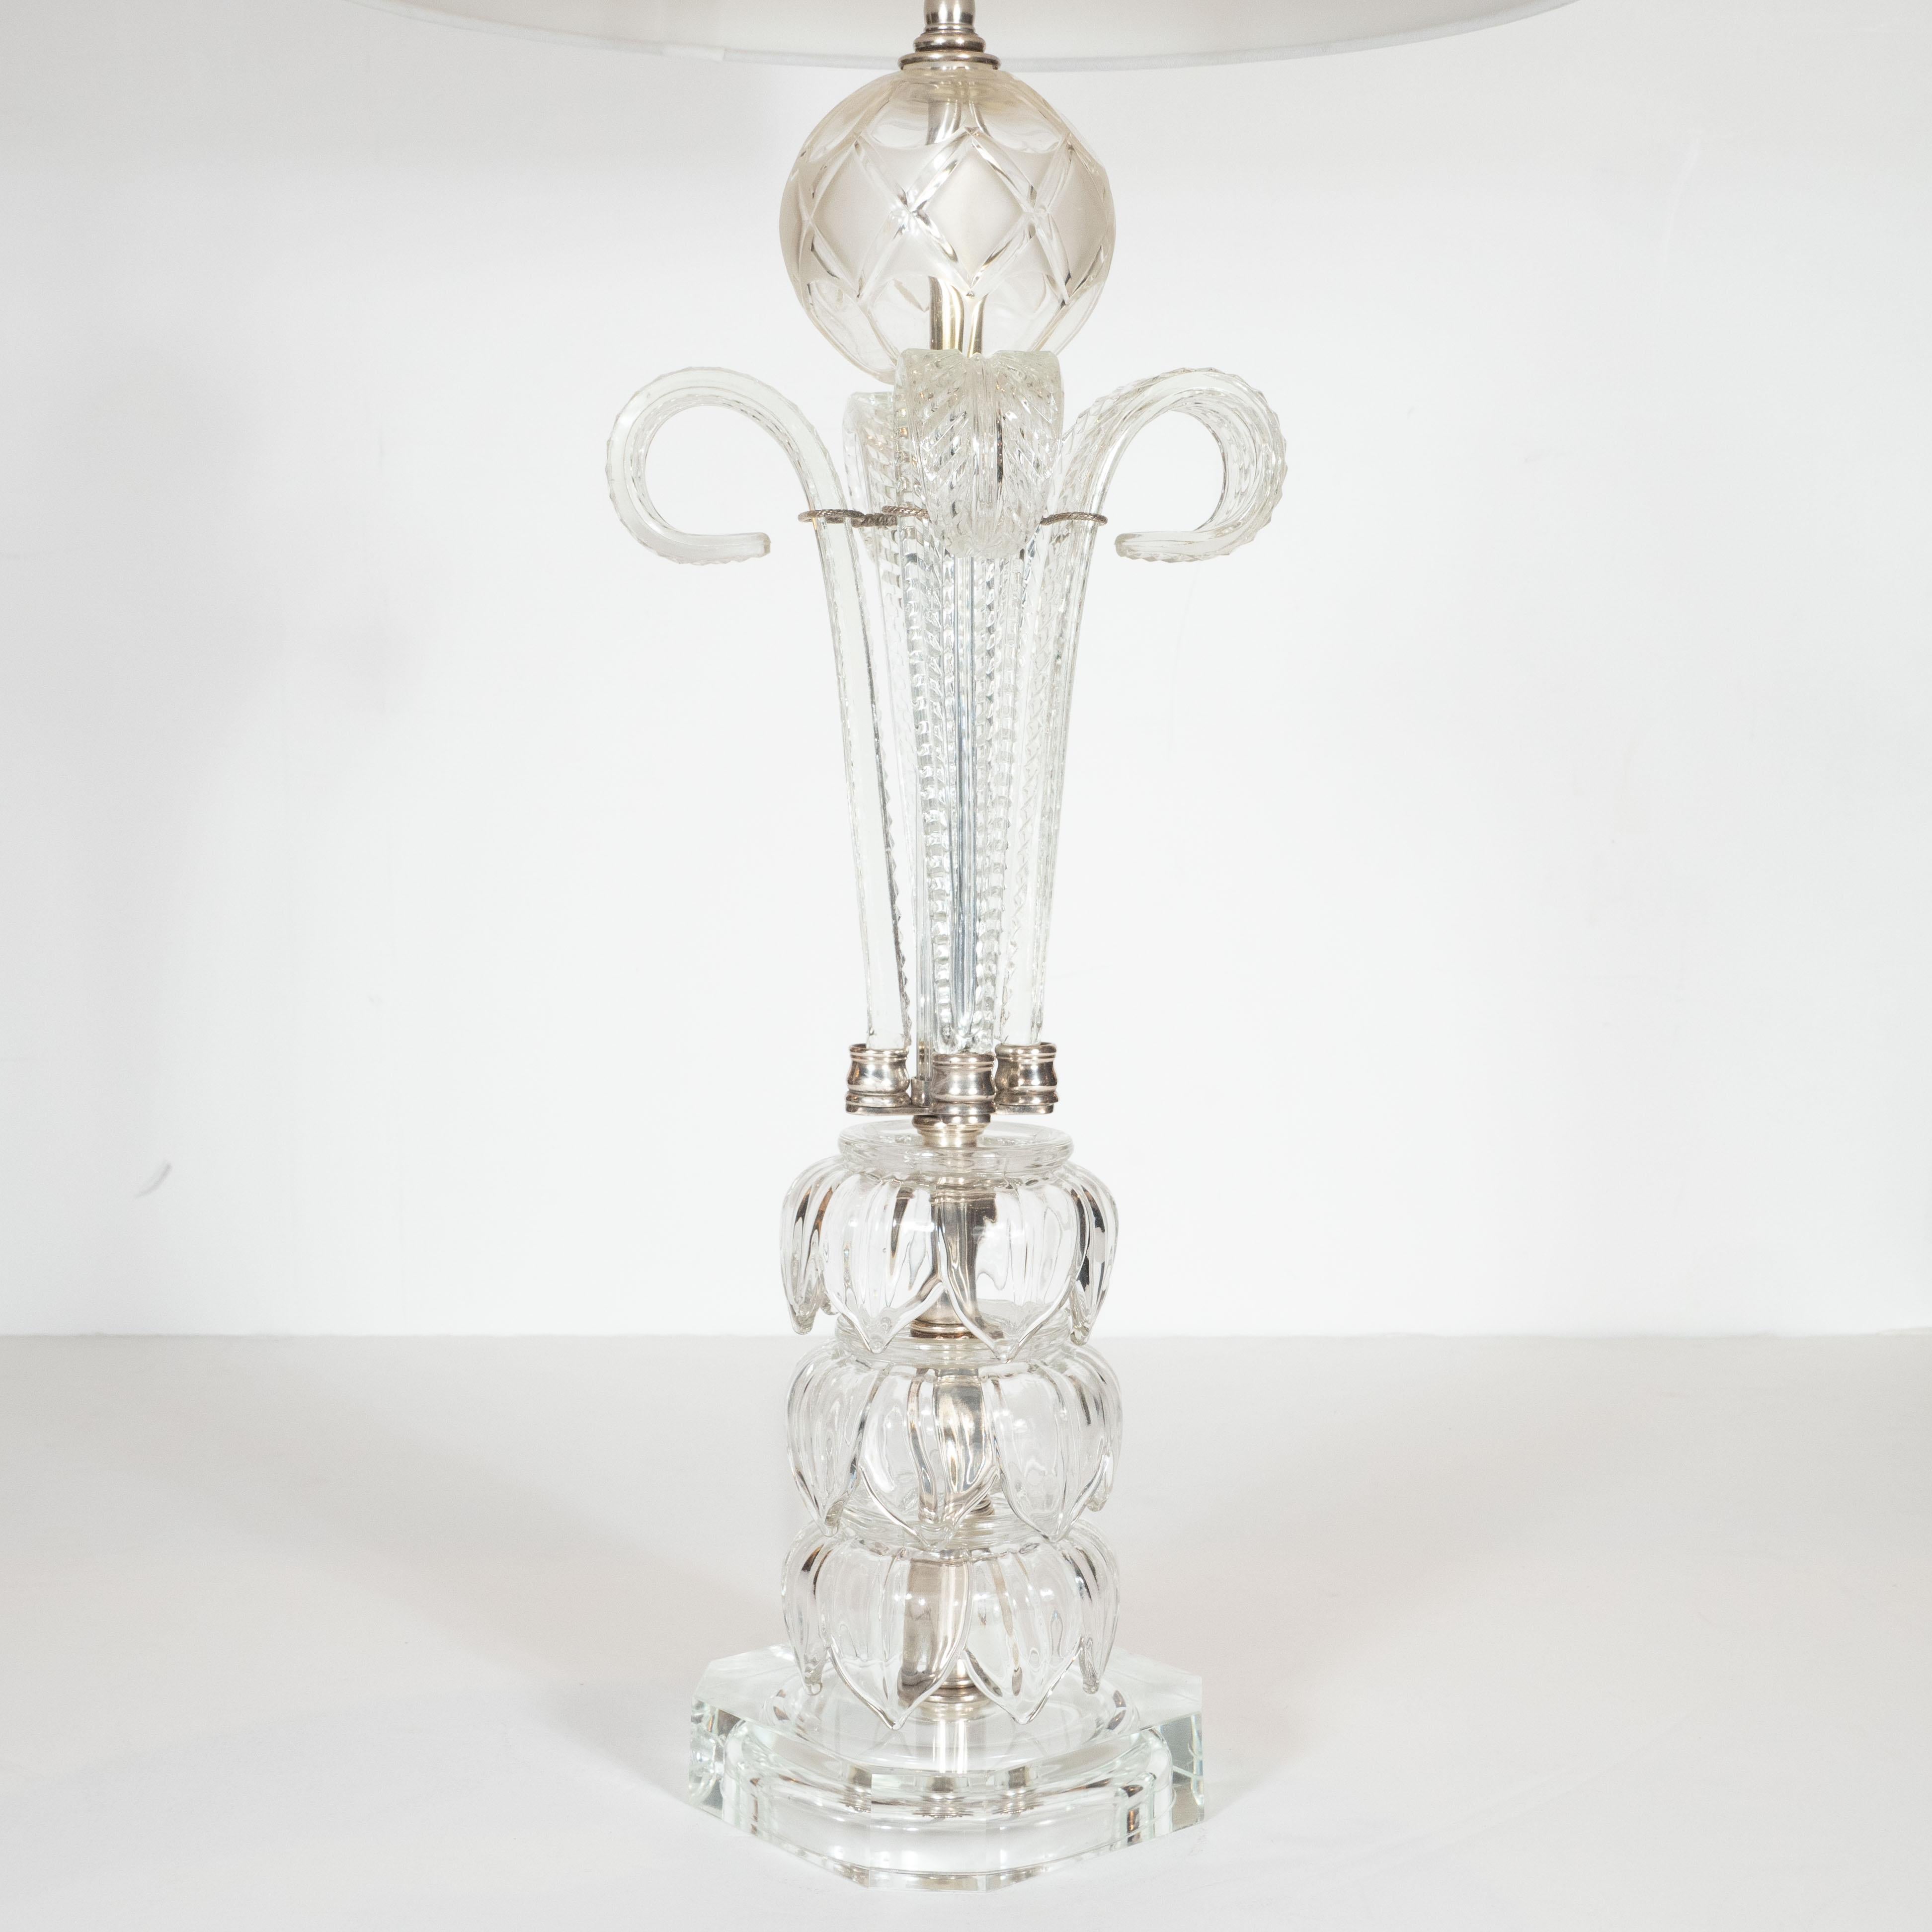 1940s Hollywood Regency Translucent Cut Crystal Table Lamp with Acanthus Details For Sale 1